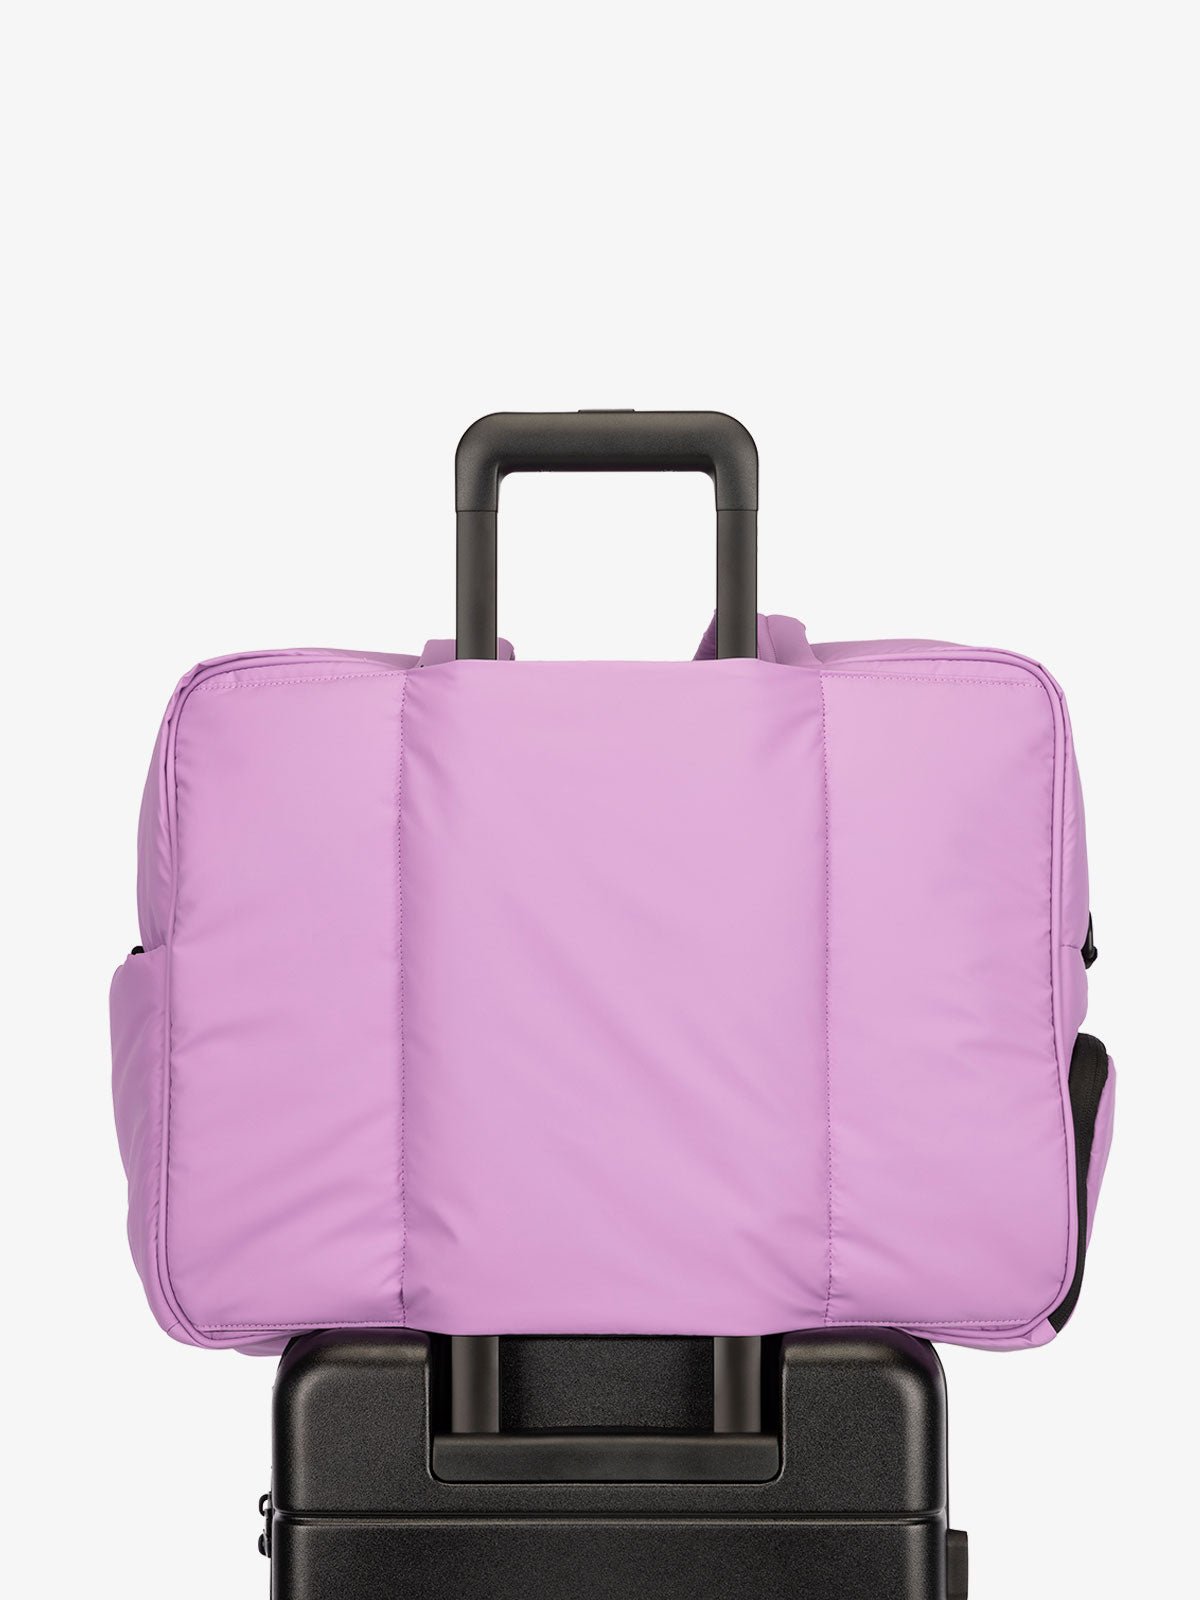 CALPAK Luka large travel duffel bag with trolley sleeve for luggage in lilac